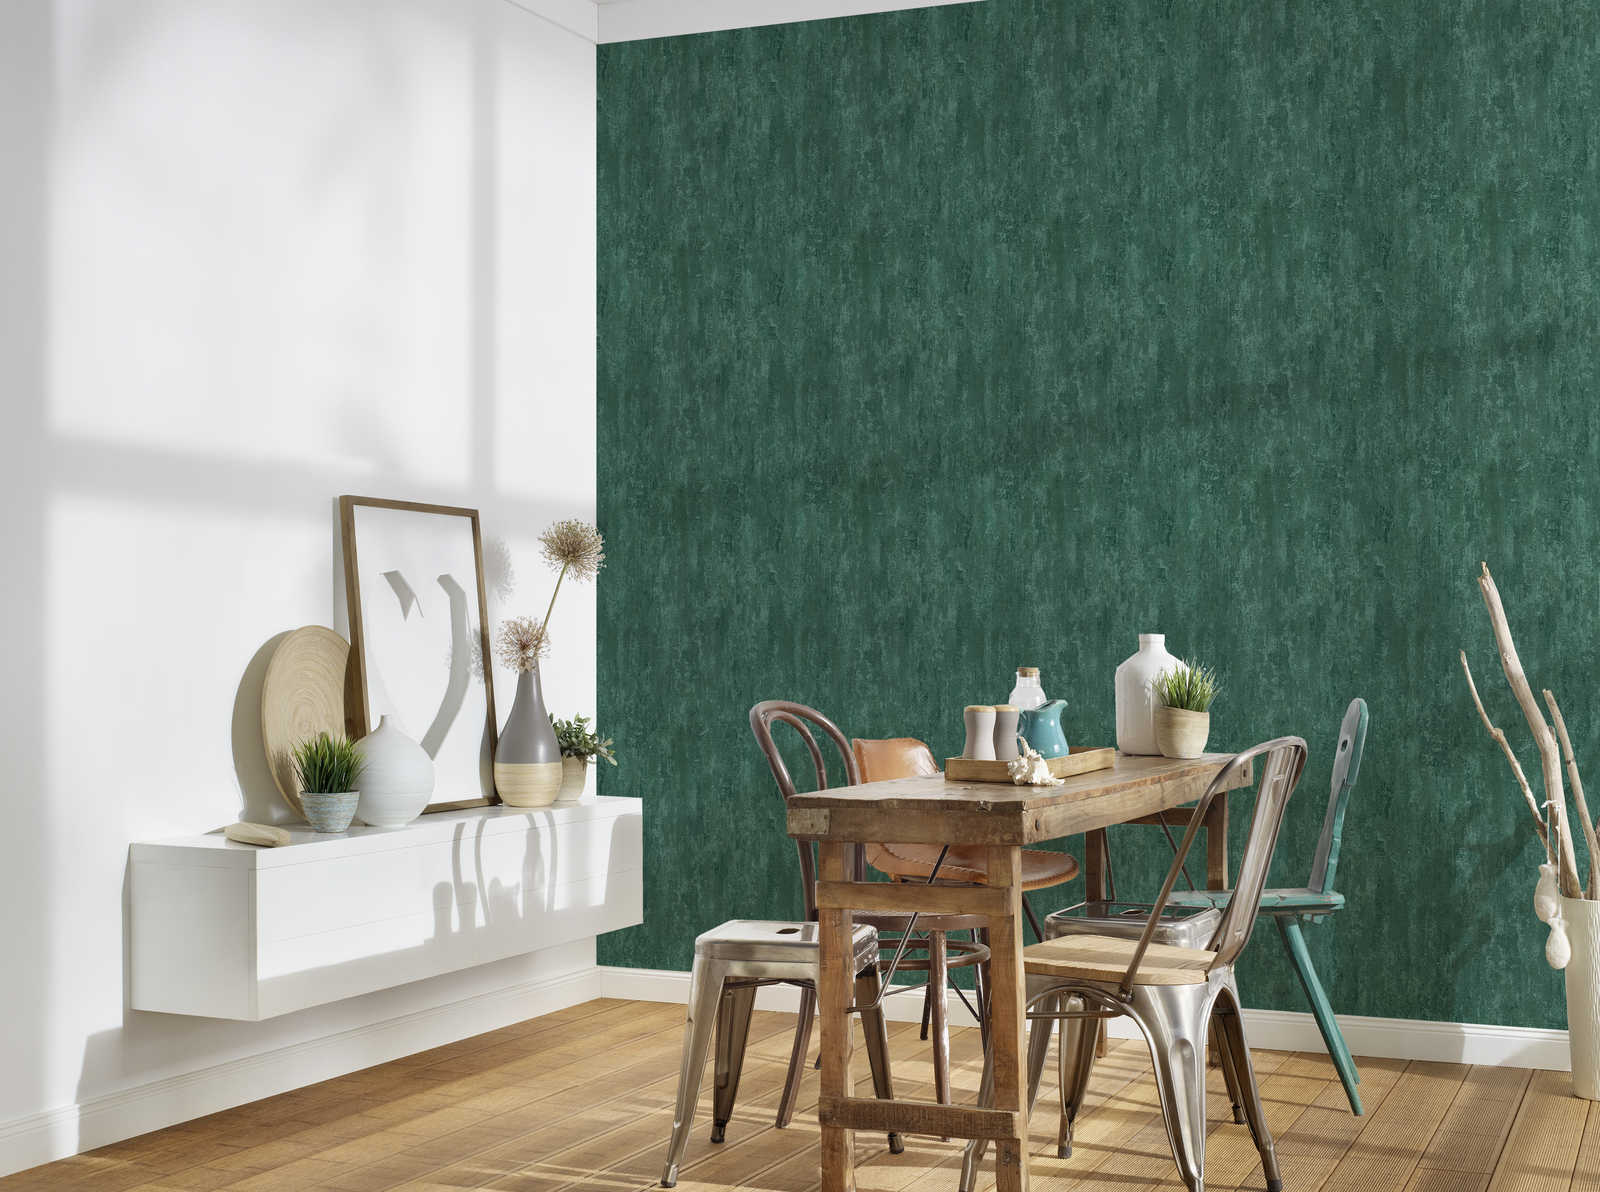             Wallpaper industrial style with texture effect - green, metallic
        